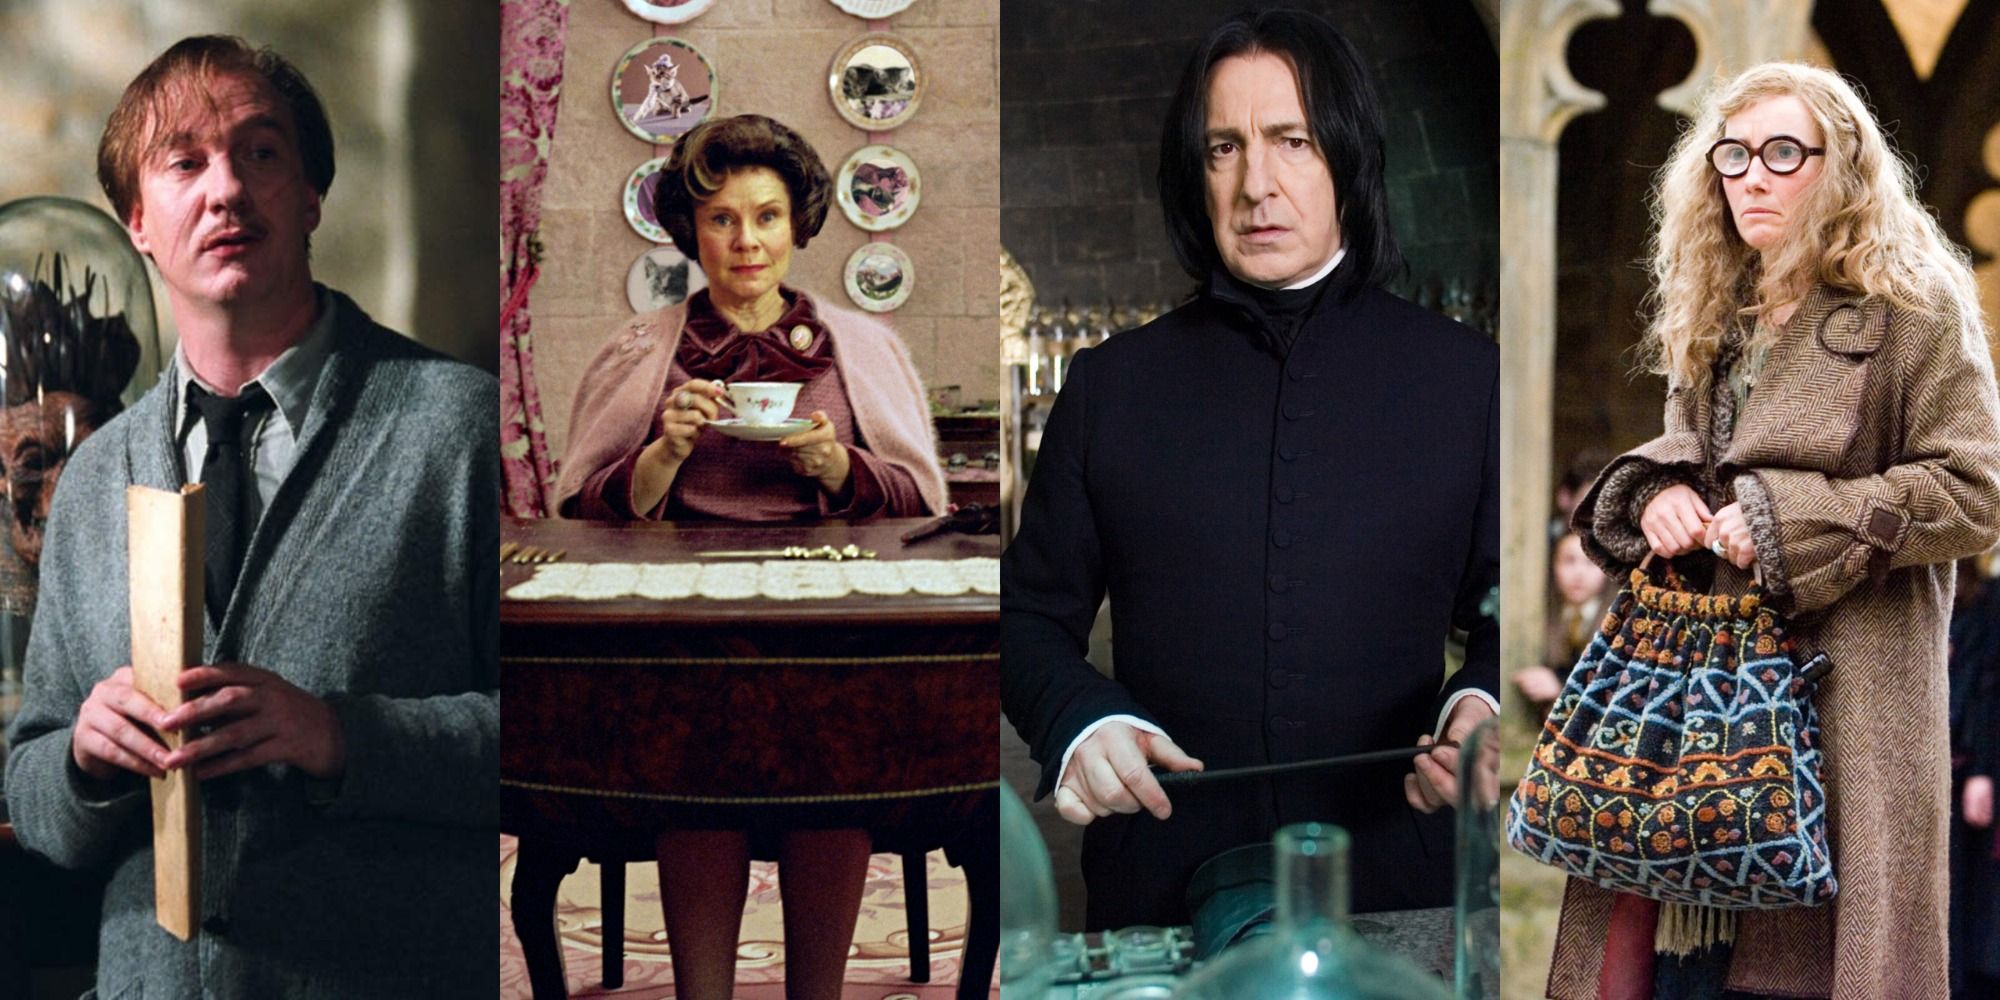 Side by side images of Professors Lupin, Umbridge, Snape, and Trelawney in Harry Potter